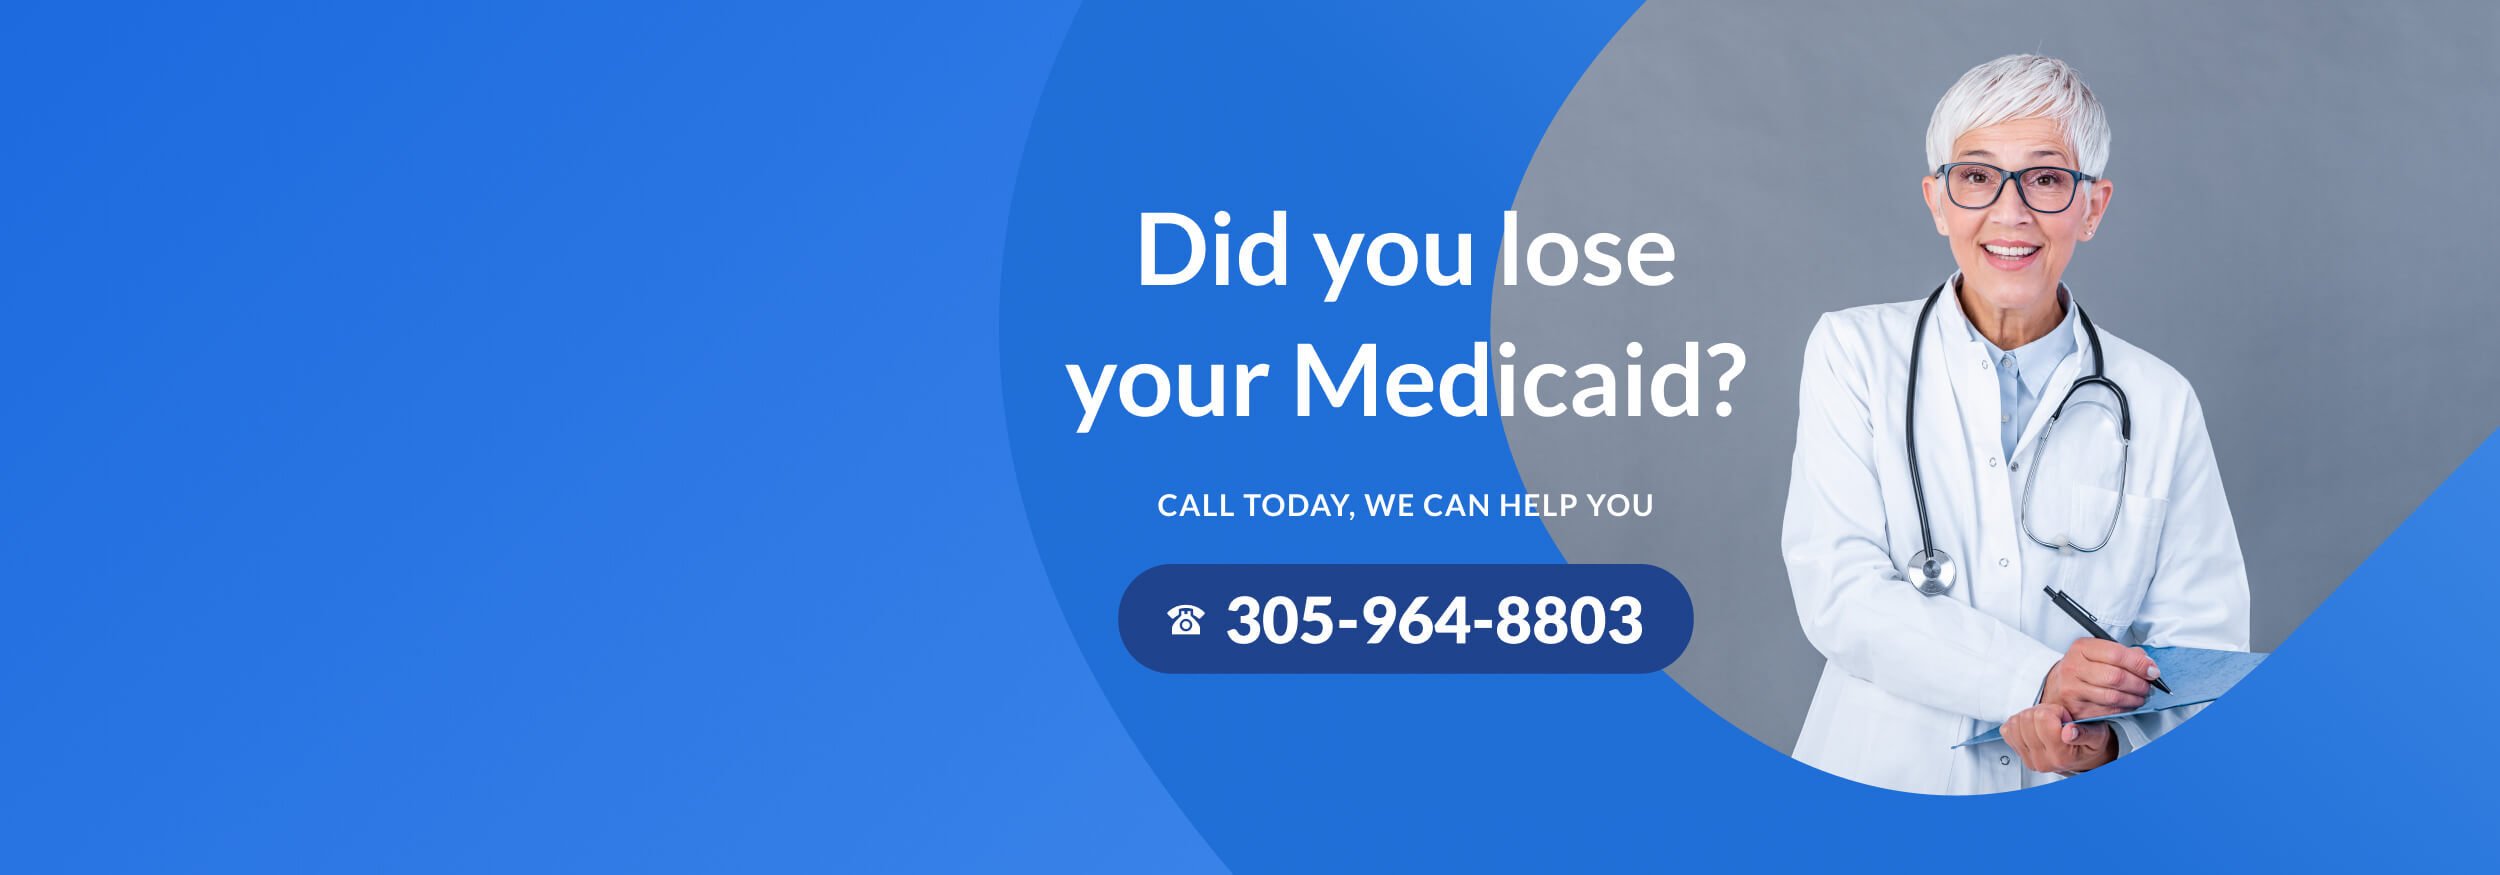 Did you lose your Medicaid coverage? Call us now!